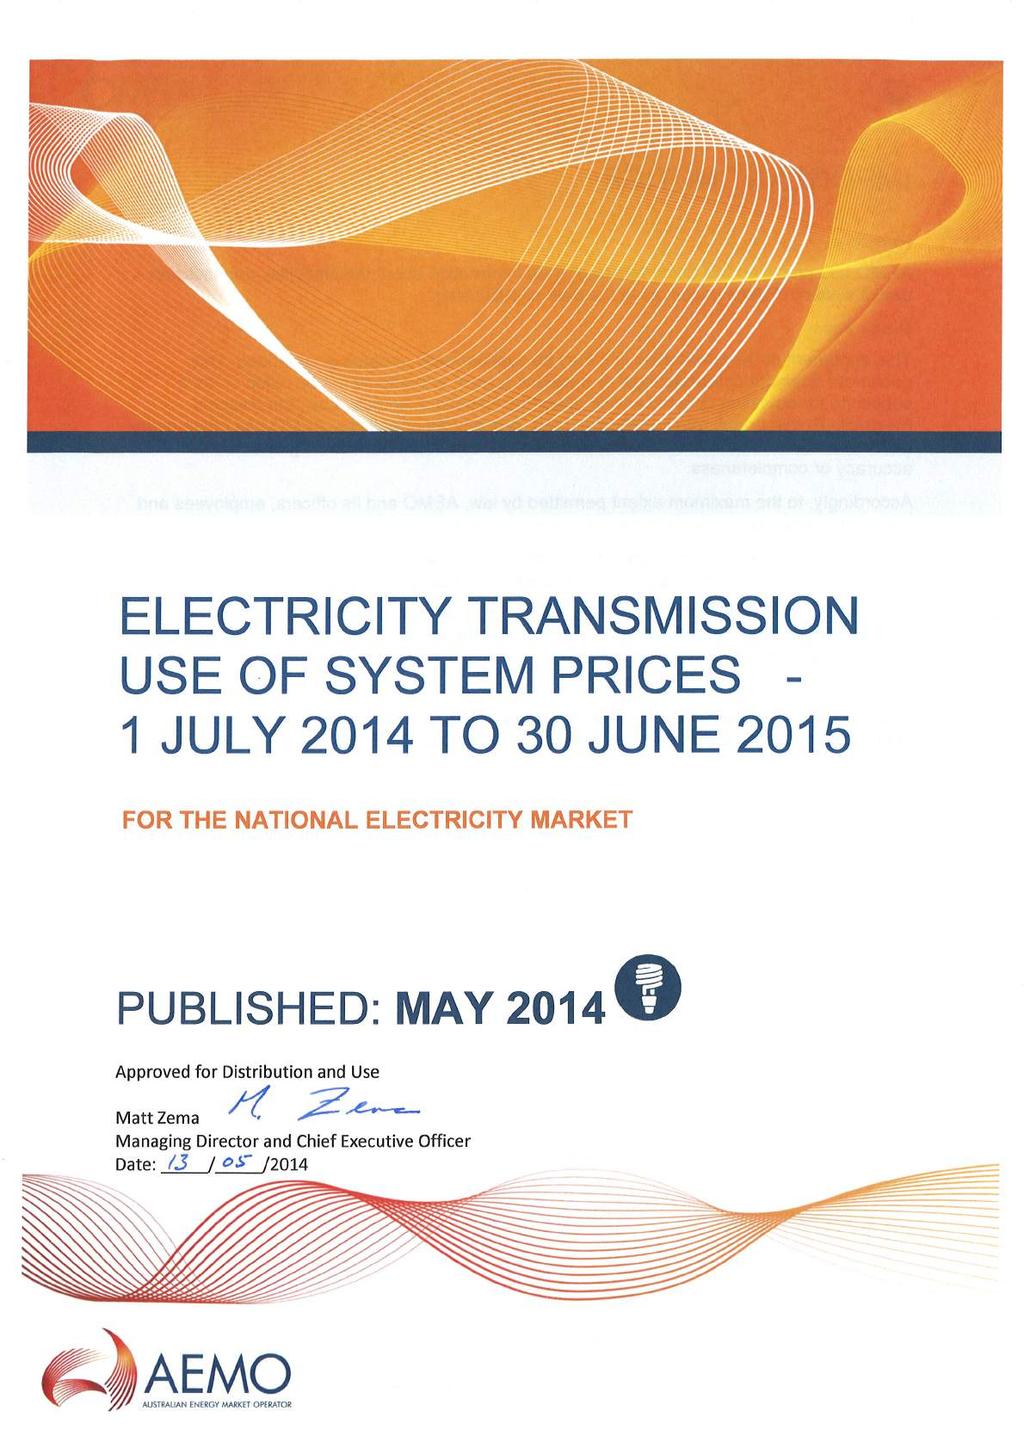 ELECTRICITY TRANSMISSION USE OF SYSTEM PRICES - 1 JULY 2014 TO 30 JUNE 2015 FOR THE NATIONAL ELECTRICITY MARKET PUBLISHED: MAY